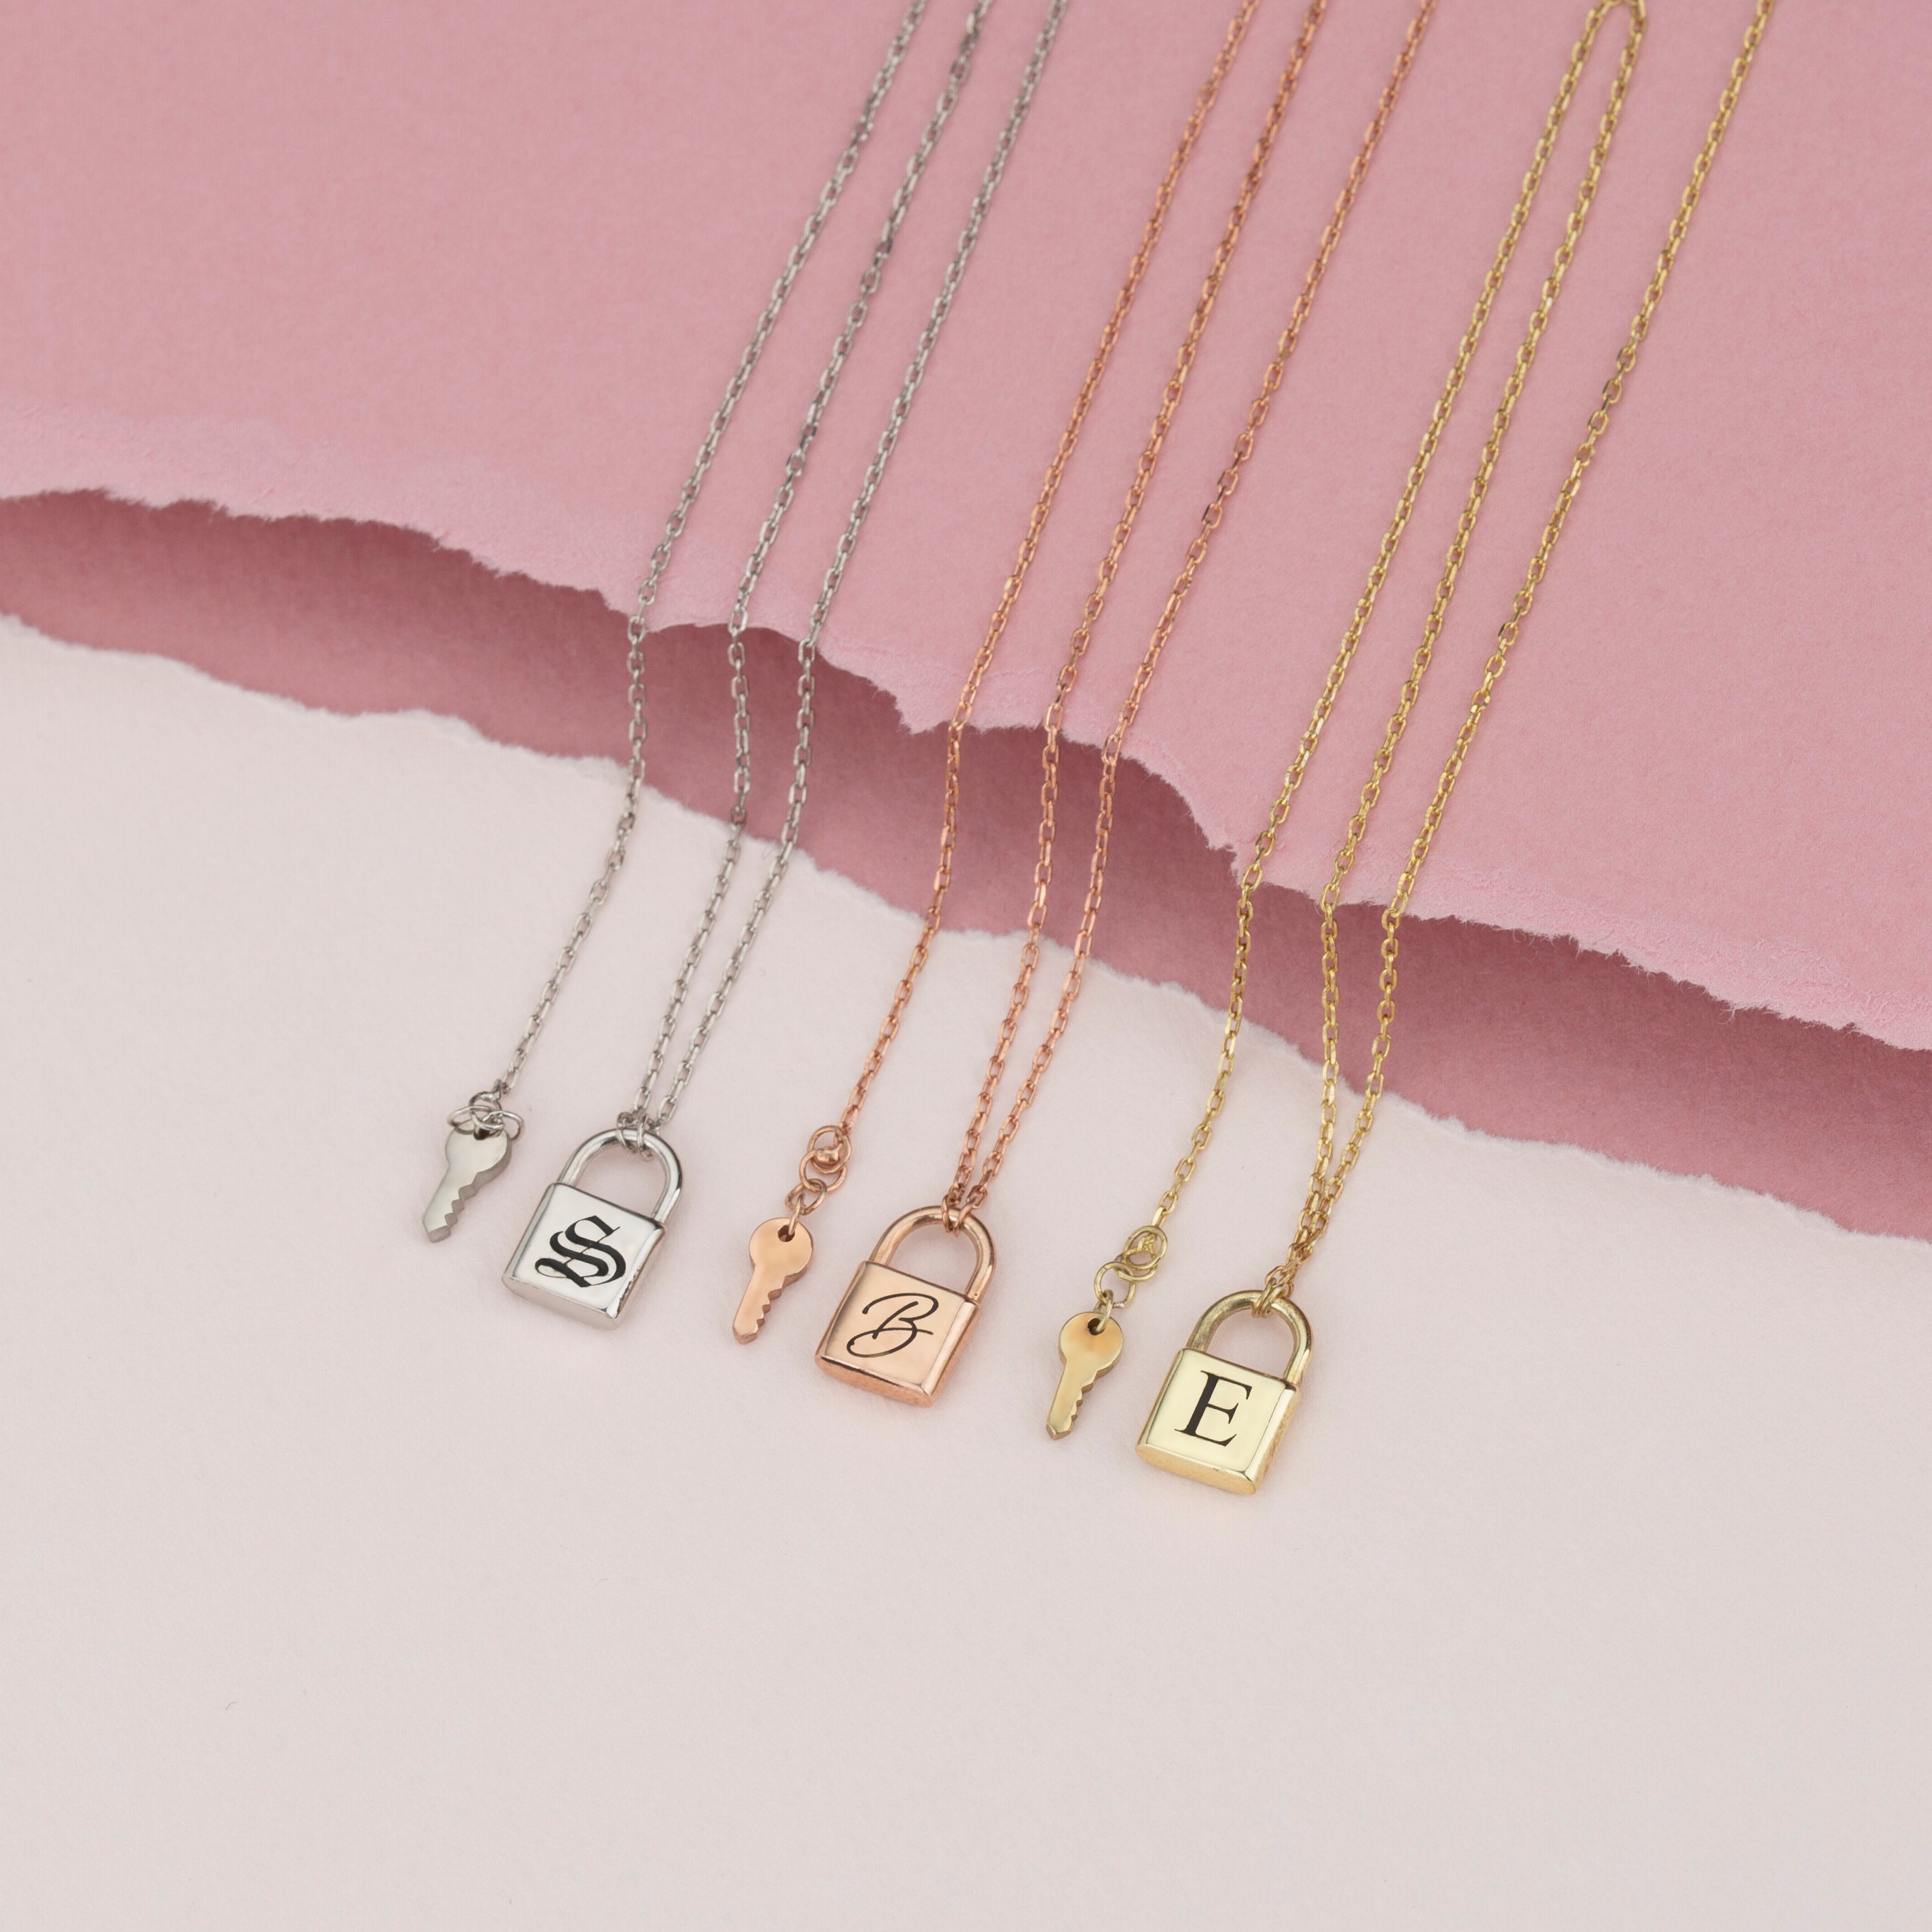 Gold Lock Necklace Chain Lock Necklace Initial Lock Necklace Personalized  Necklace Gift